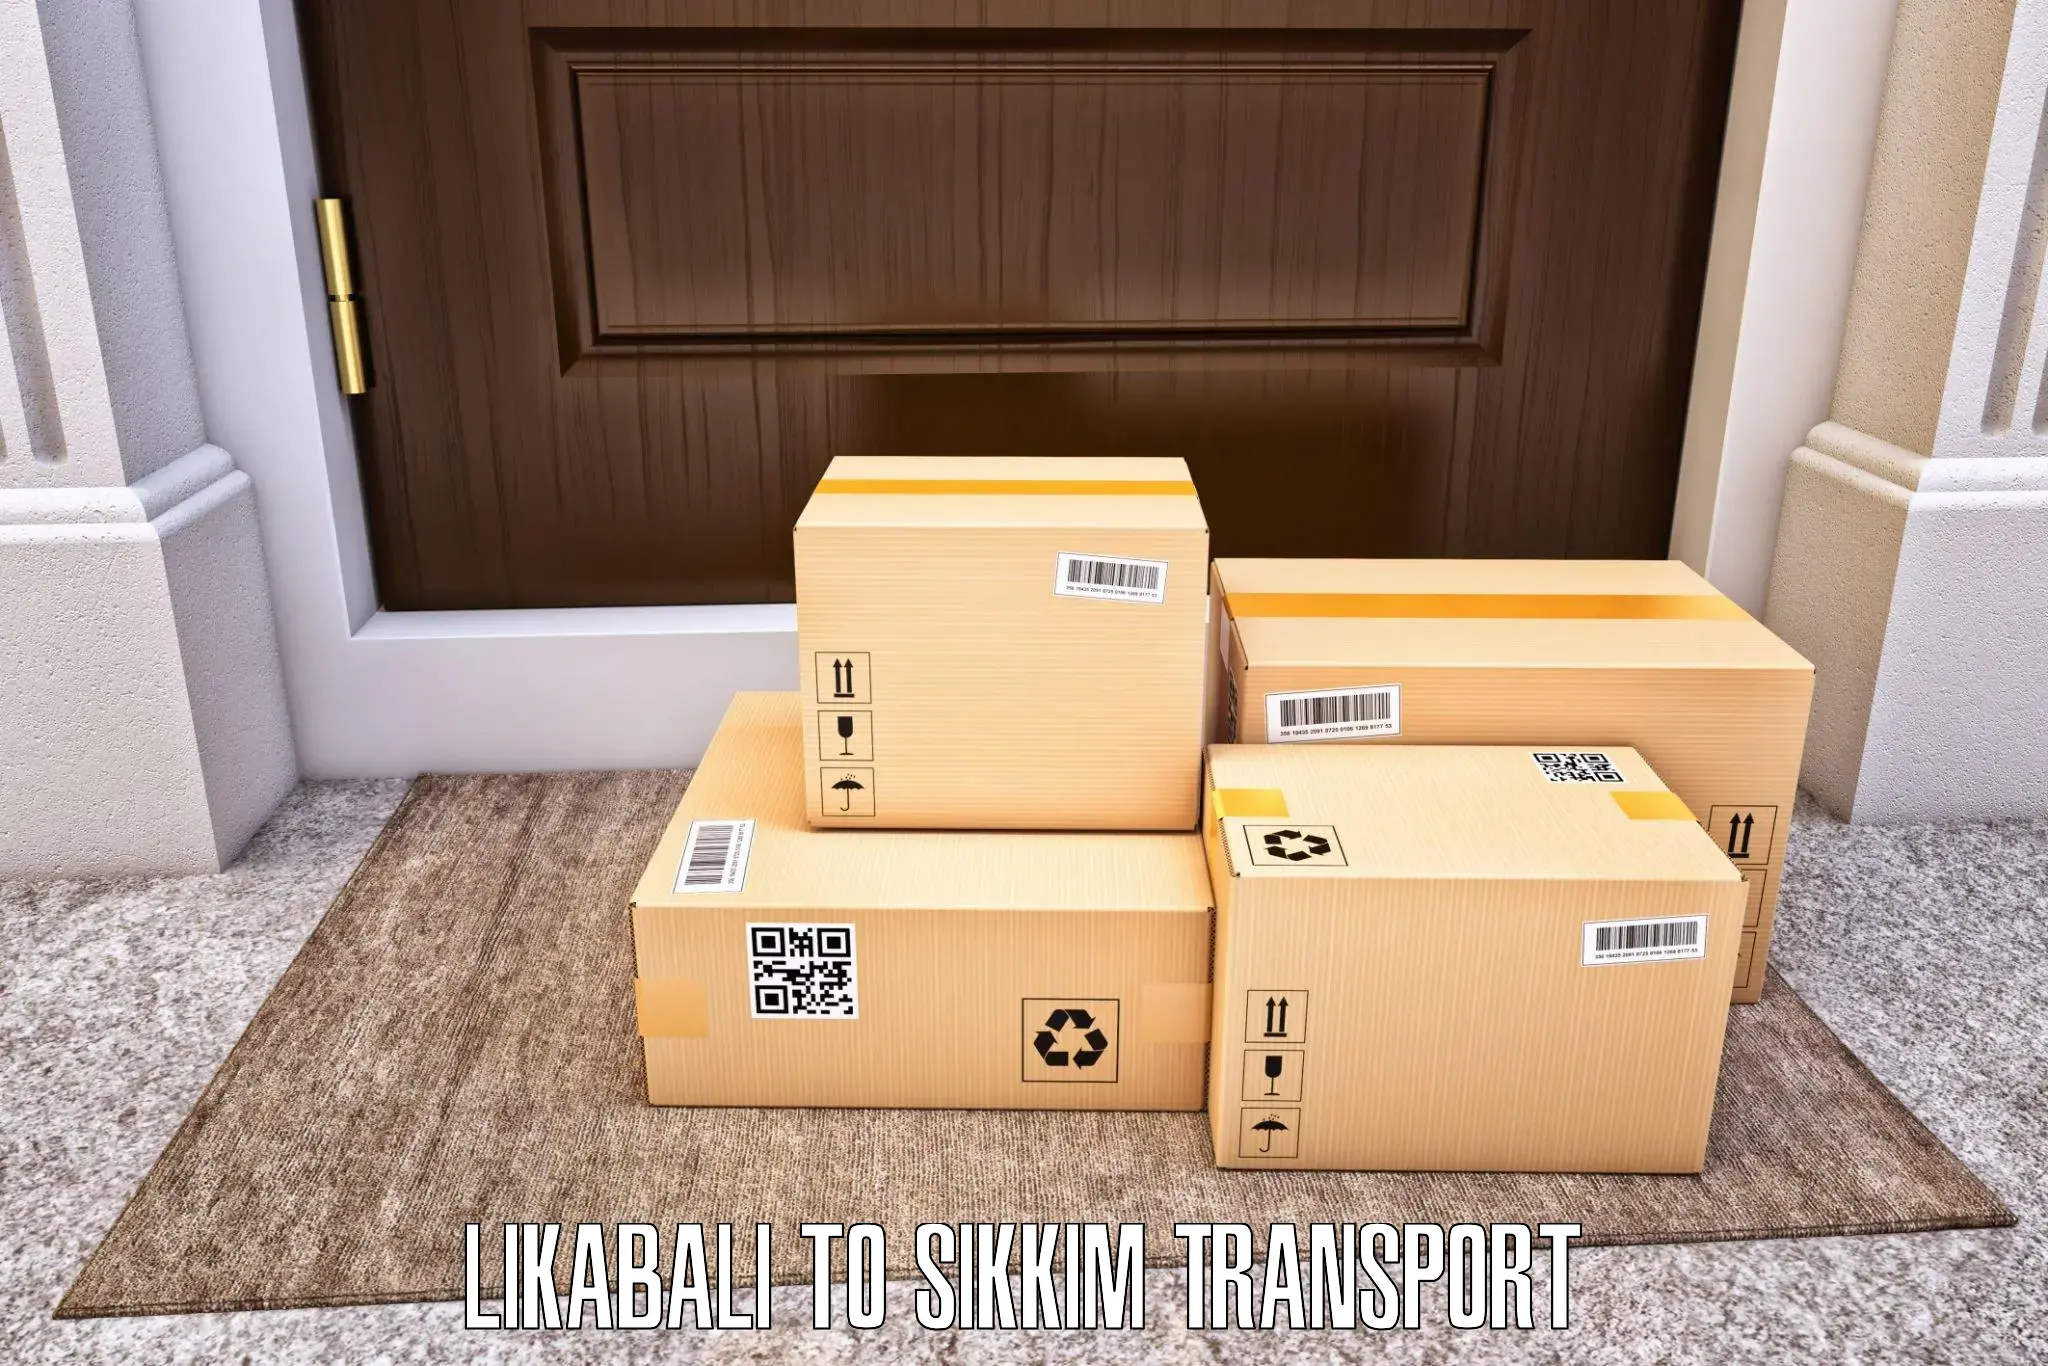 Transport shared services Likabali to Ranipool